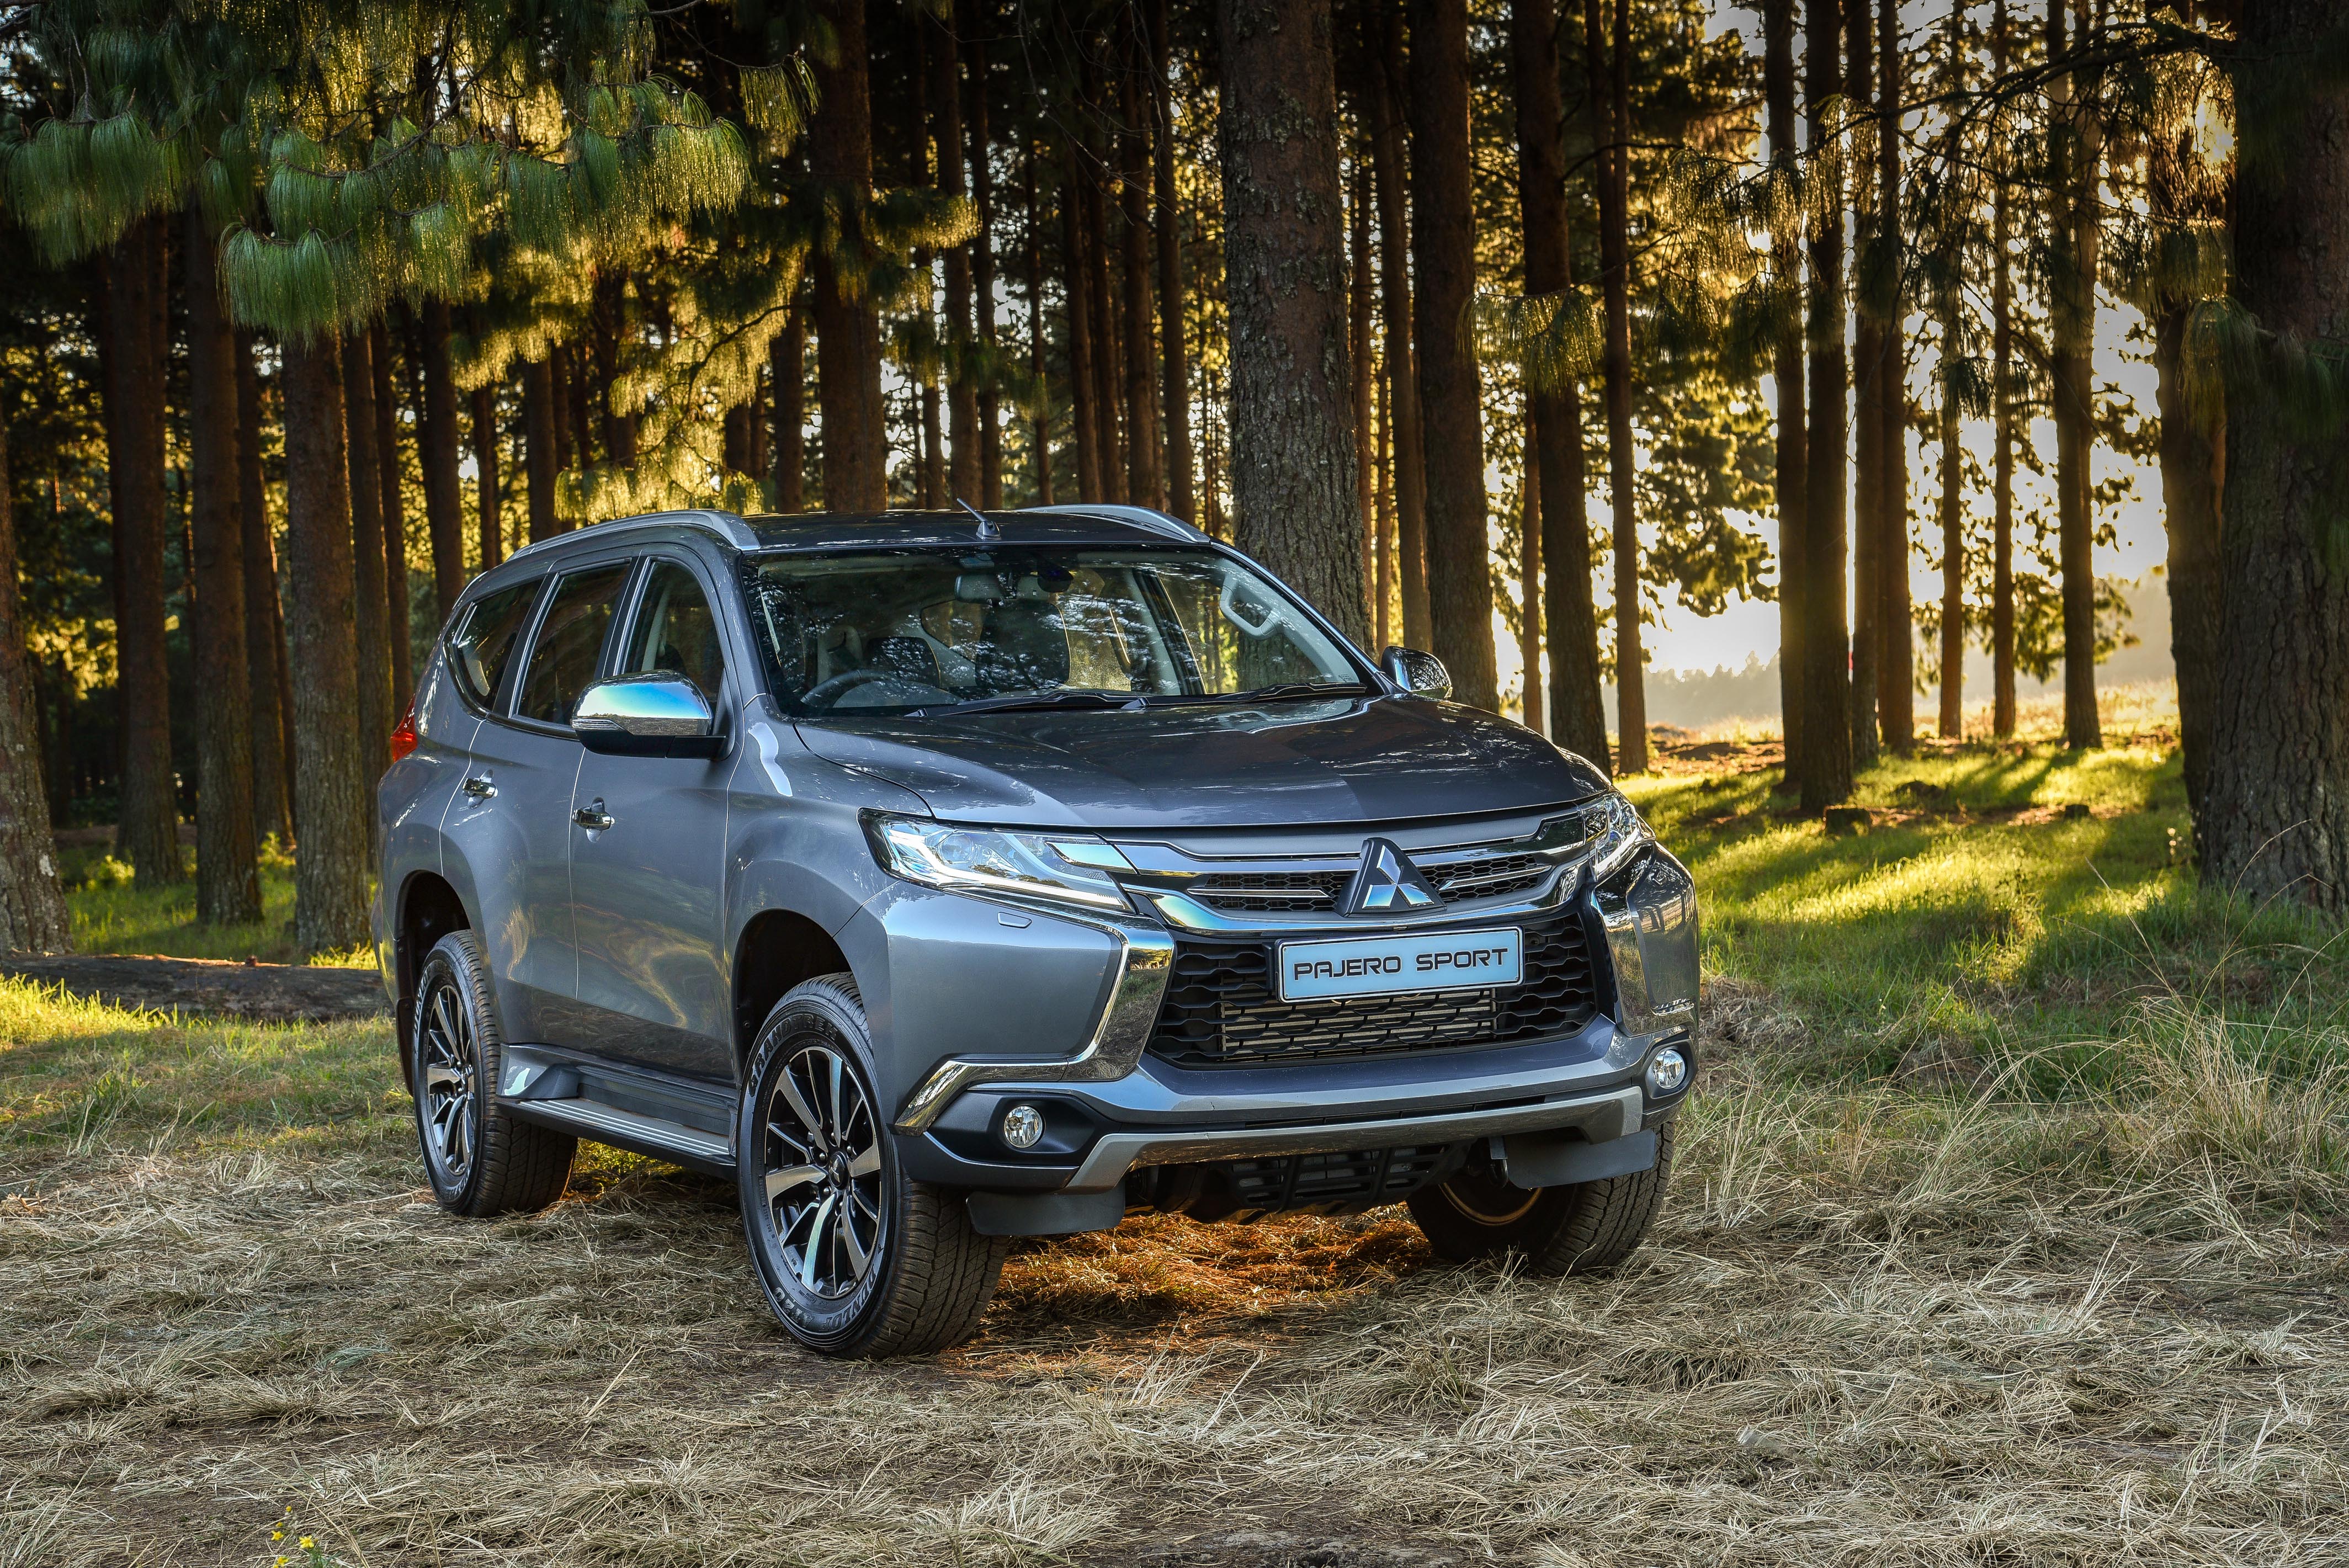 Sophisticated Pajero Sport hits SA market, offering